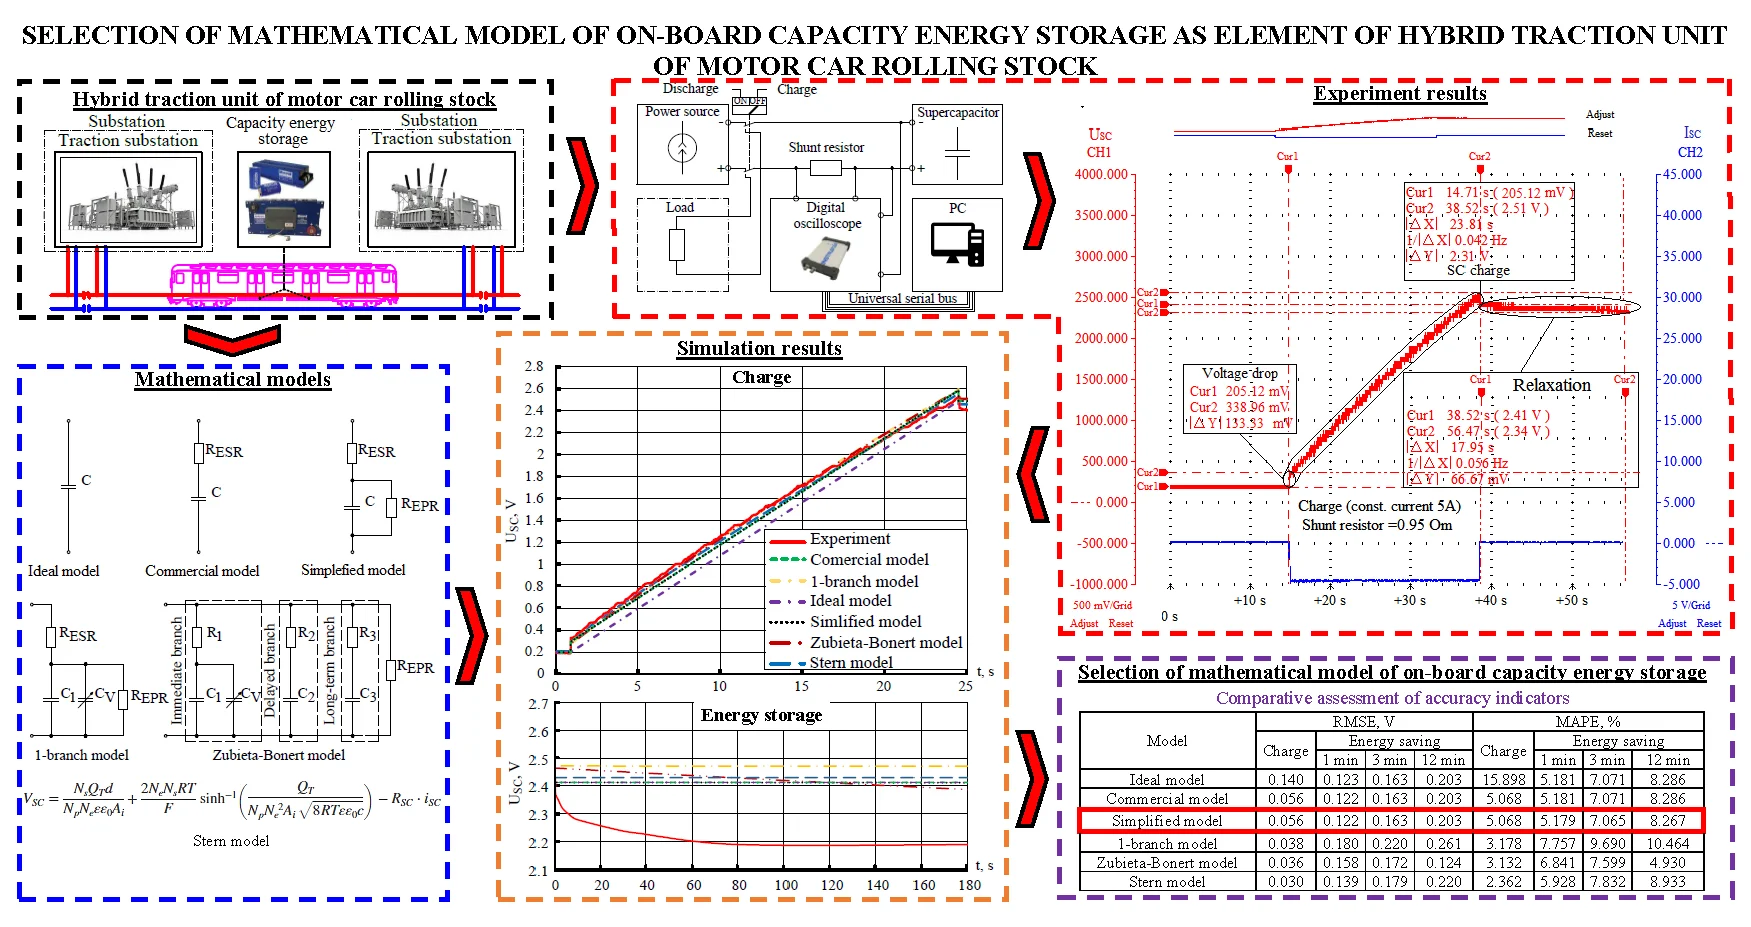 Selection of mathematical model of on-board capacity energy storage as element of hybrid traction unit of motor car rolling stock